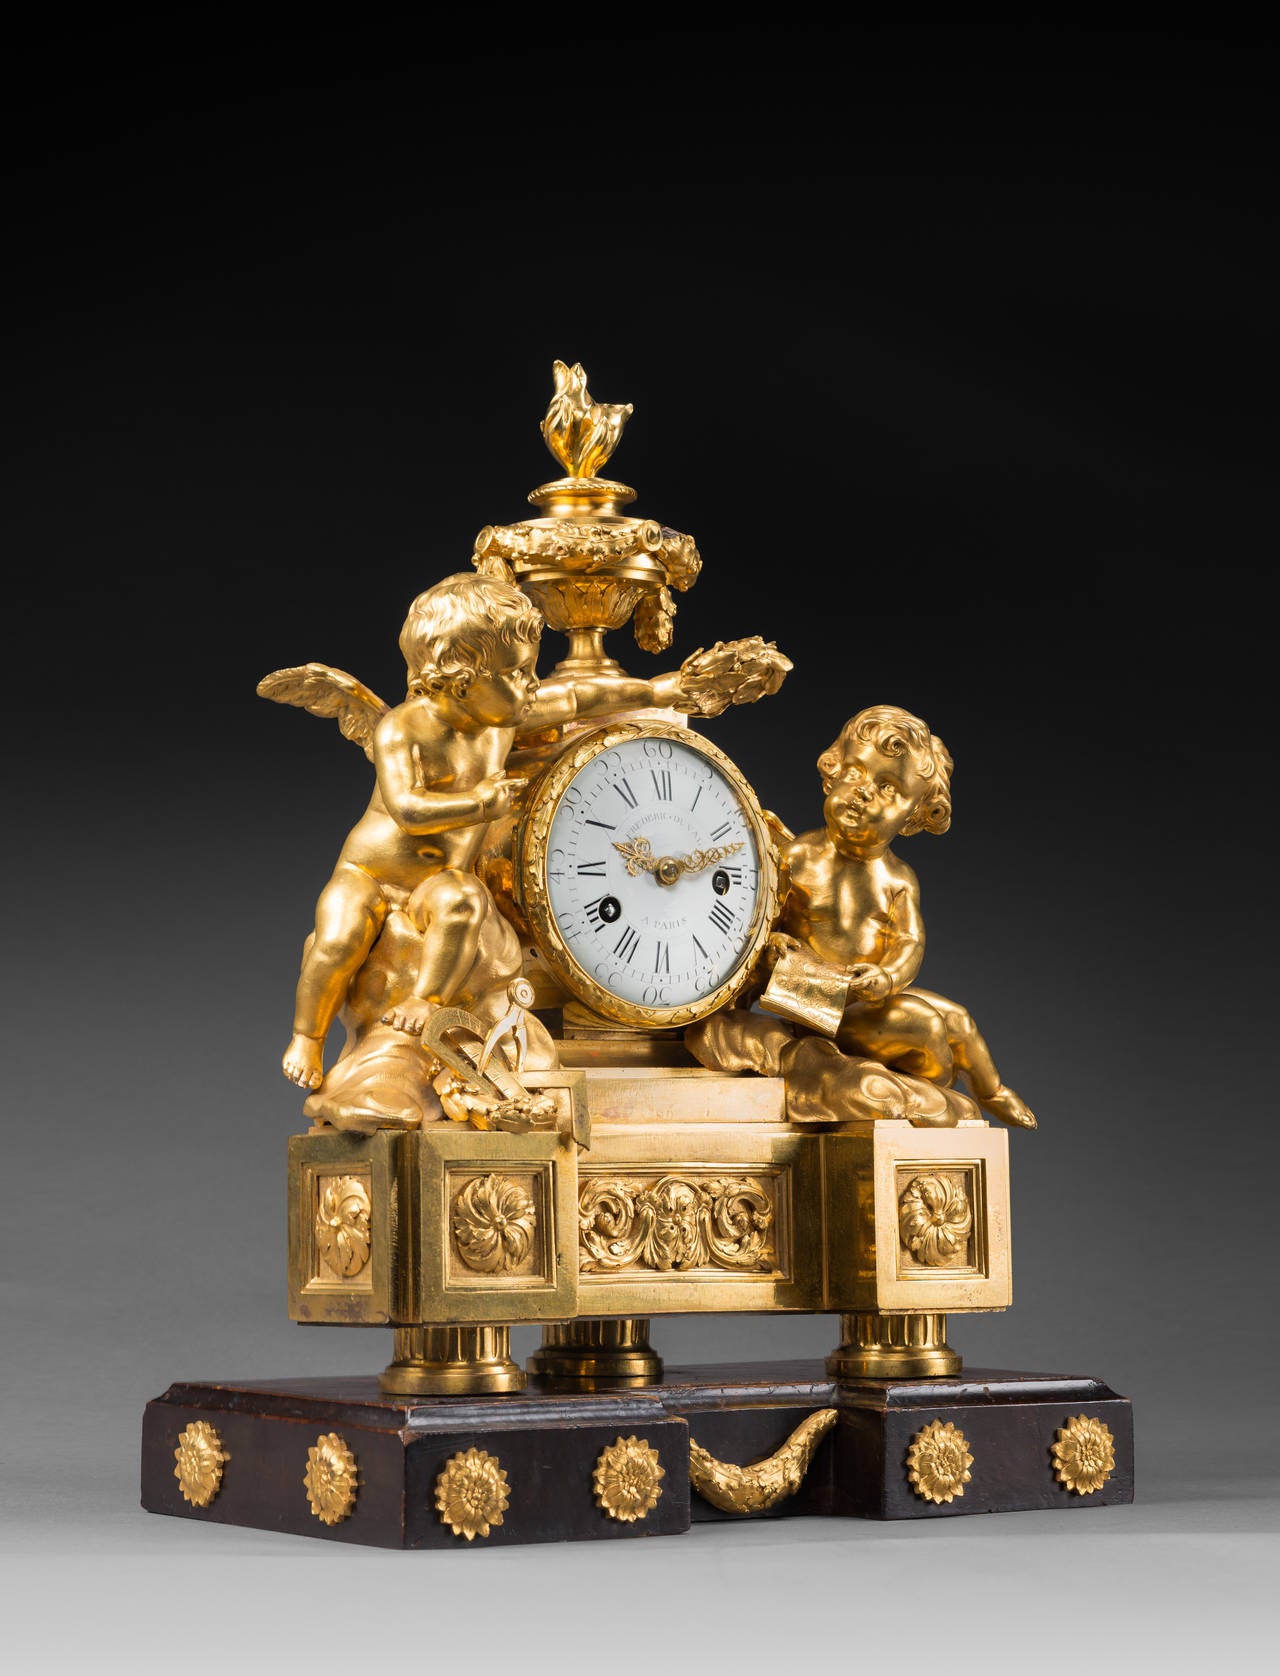 French Gilt Bronze Louis XVI Clock by Duval, Case Attributed to Saint-Germain